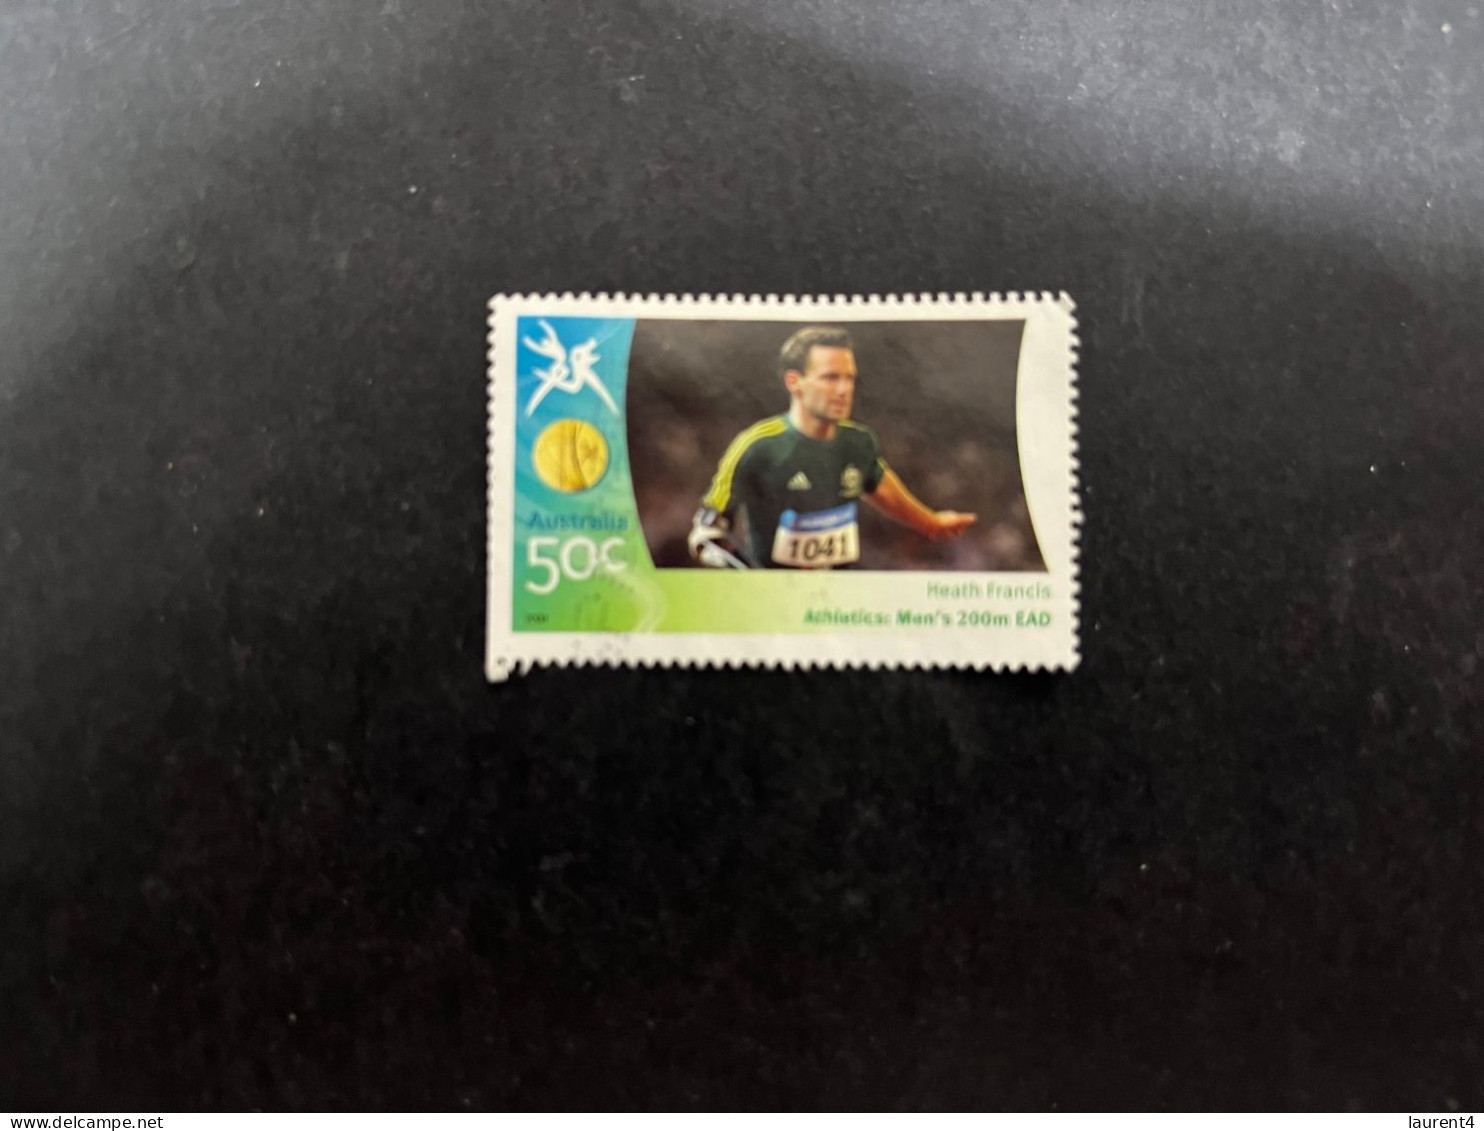 2-5-2024 (stamp) Australia - 1 Used 50 Cent - Athletics Commonweath Games Gold - H. Francis - Used Stamps